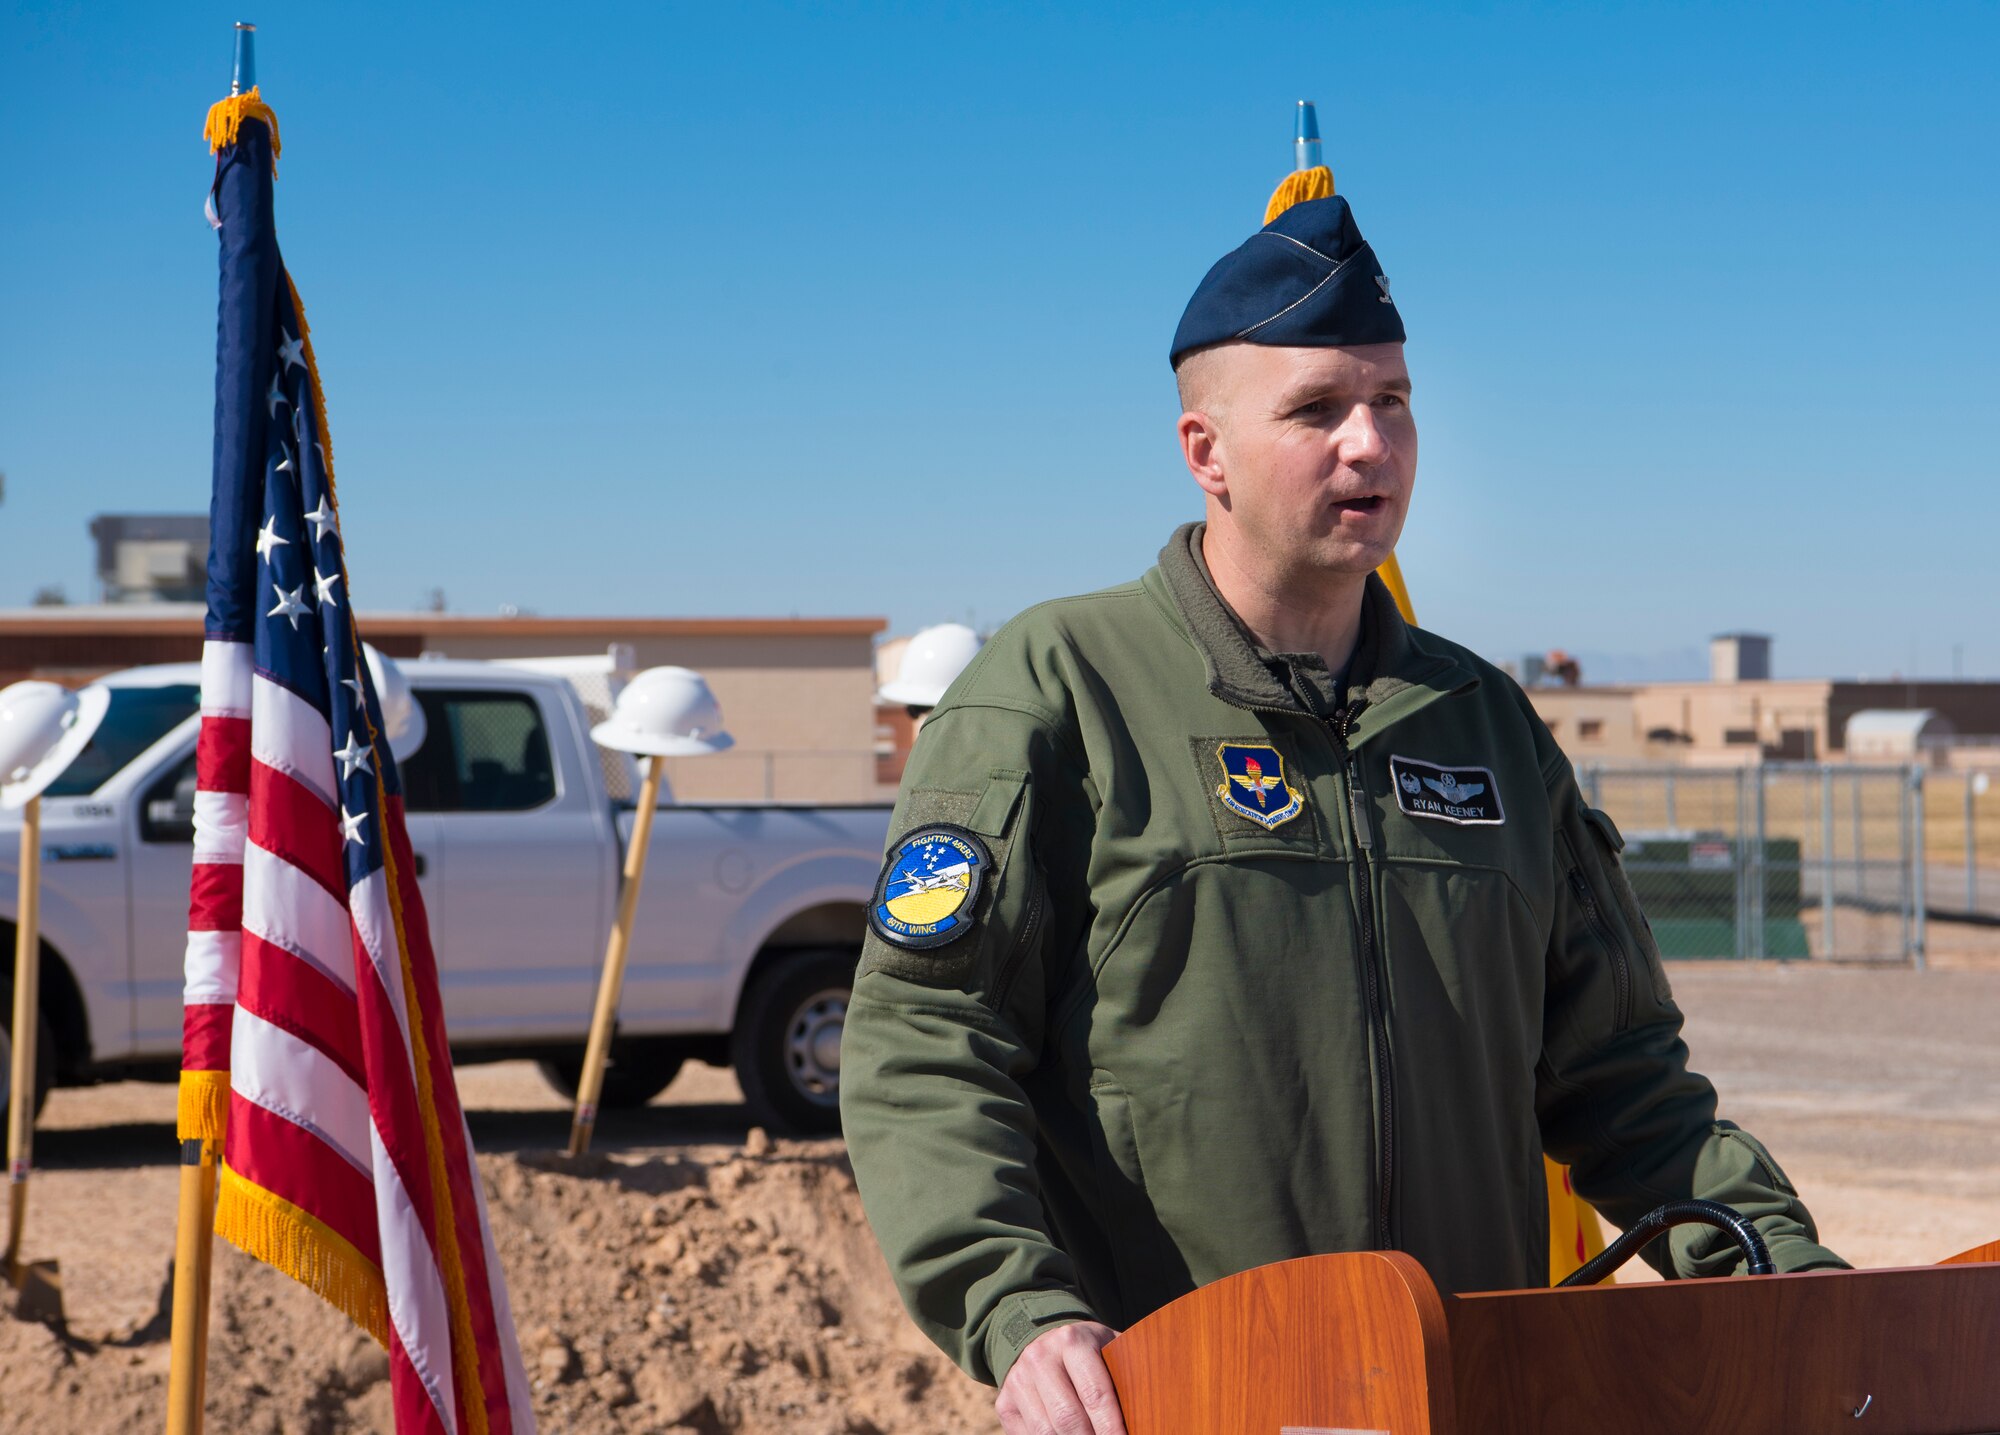 Col. Ryan Keeney, 49th Wing commander, provides remarks during a groundbreaking ceremony, Feb. 19, 2021, on Holloman Air Force Base, New Mexico. Through partnerships between Holloman, APS, civic leaders, and state leaders, the new, modernized Holloman Elementary school is expected to open its doors by the fall of 2022. (U.S. Air Force photo by Airman 1st Class Jessica Sanchez)